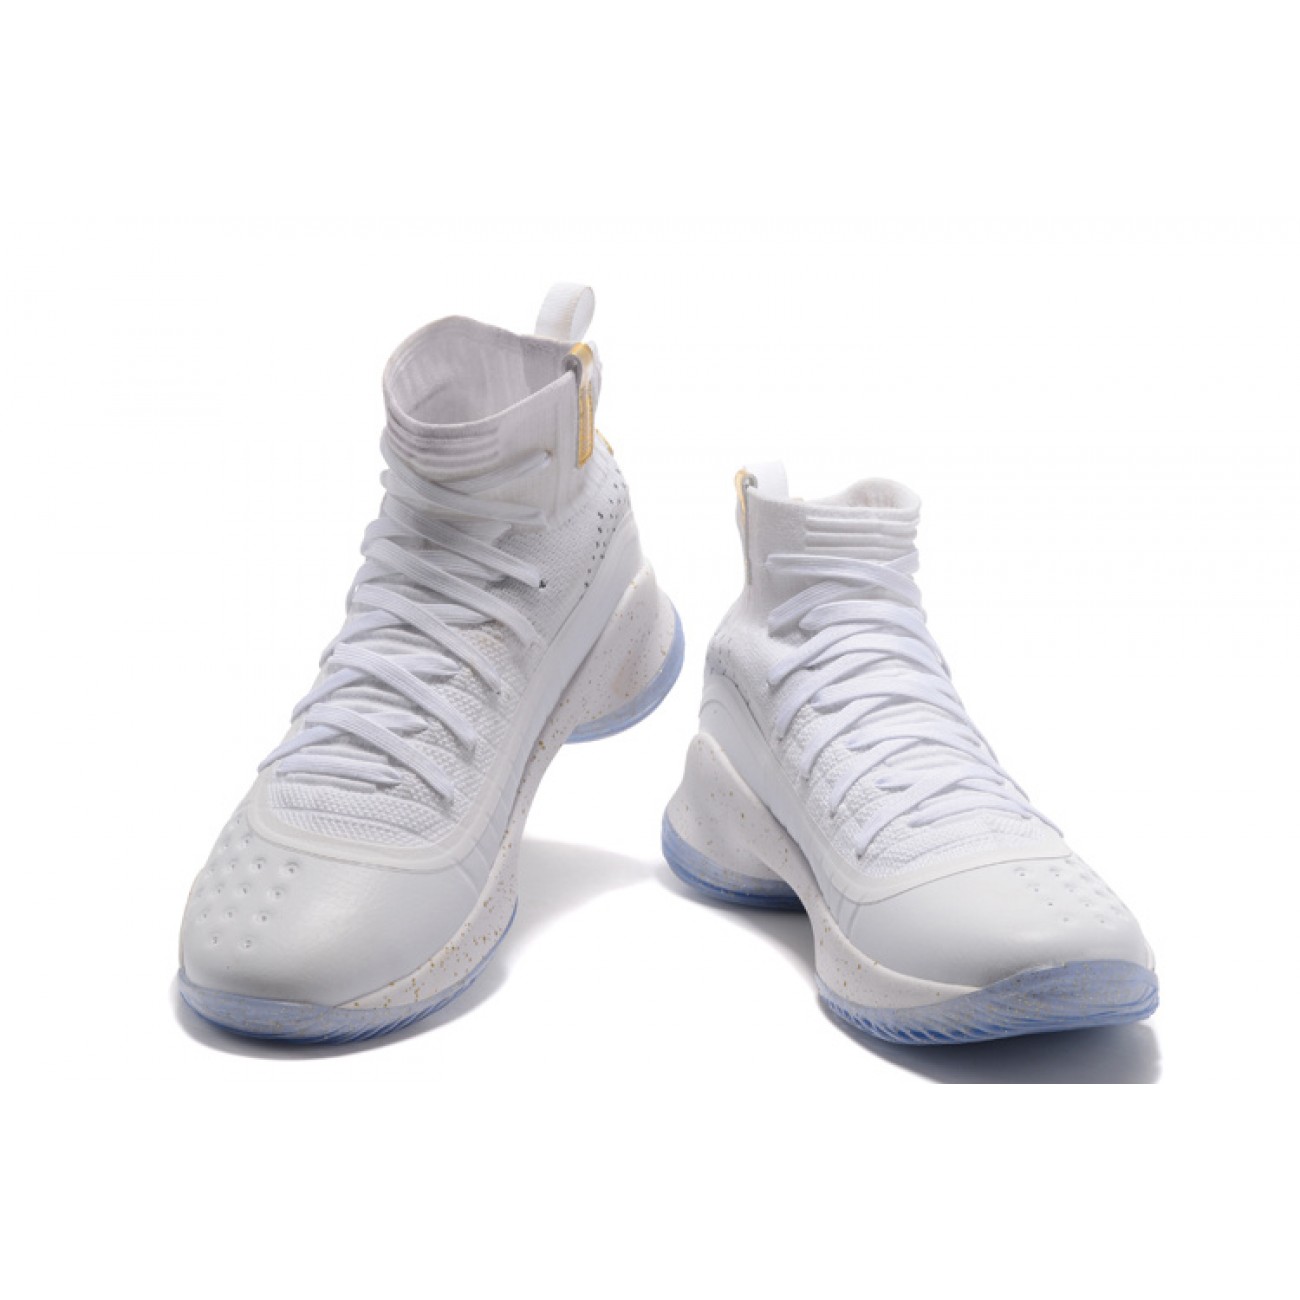 Under Armour UA Curry 4 White/Gold